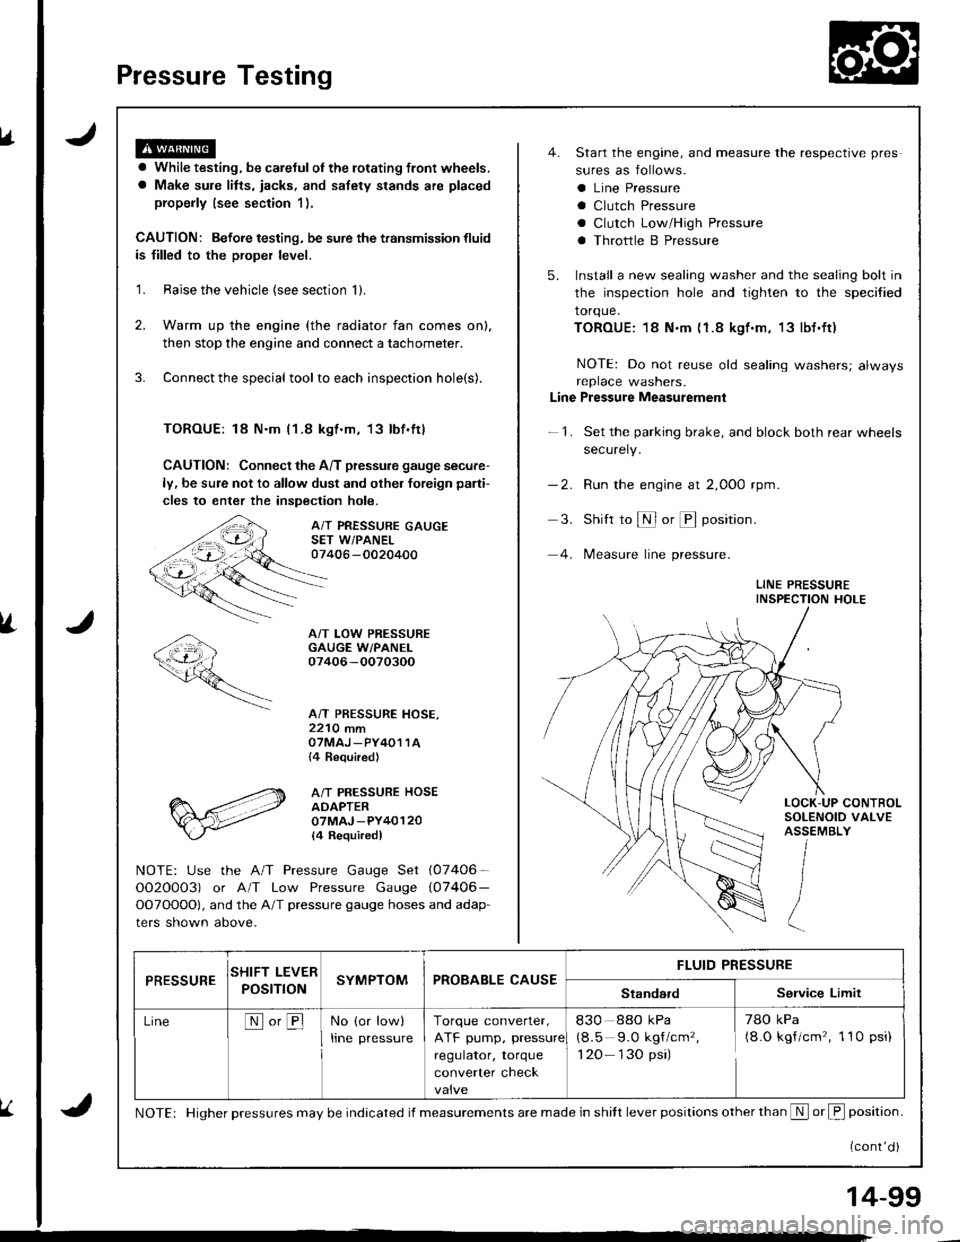 ACURA INTEGRA 1998  Service Repair Manual Pressure Testing
a While testing, be careJulot the rotating front wheels.
a Make sule litts, iacks, and safety stands are placed
properly (see section 1).
CAUTION: Befoie testing, be sure the transmis